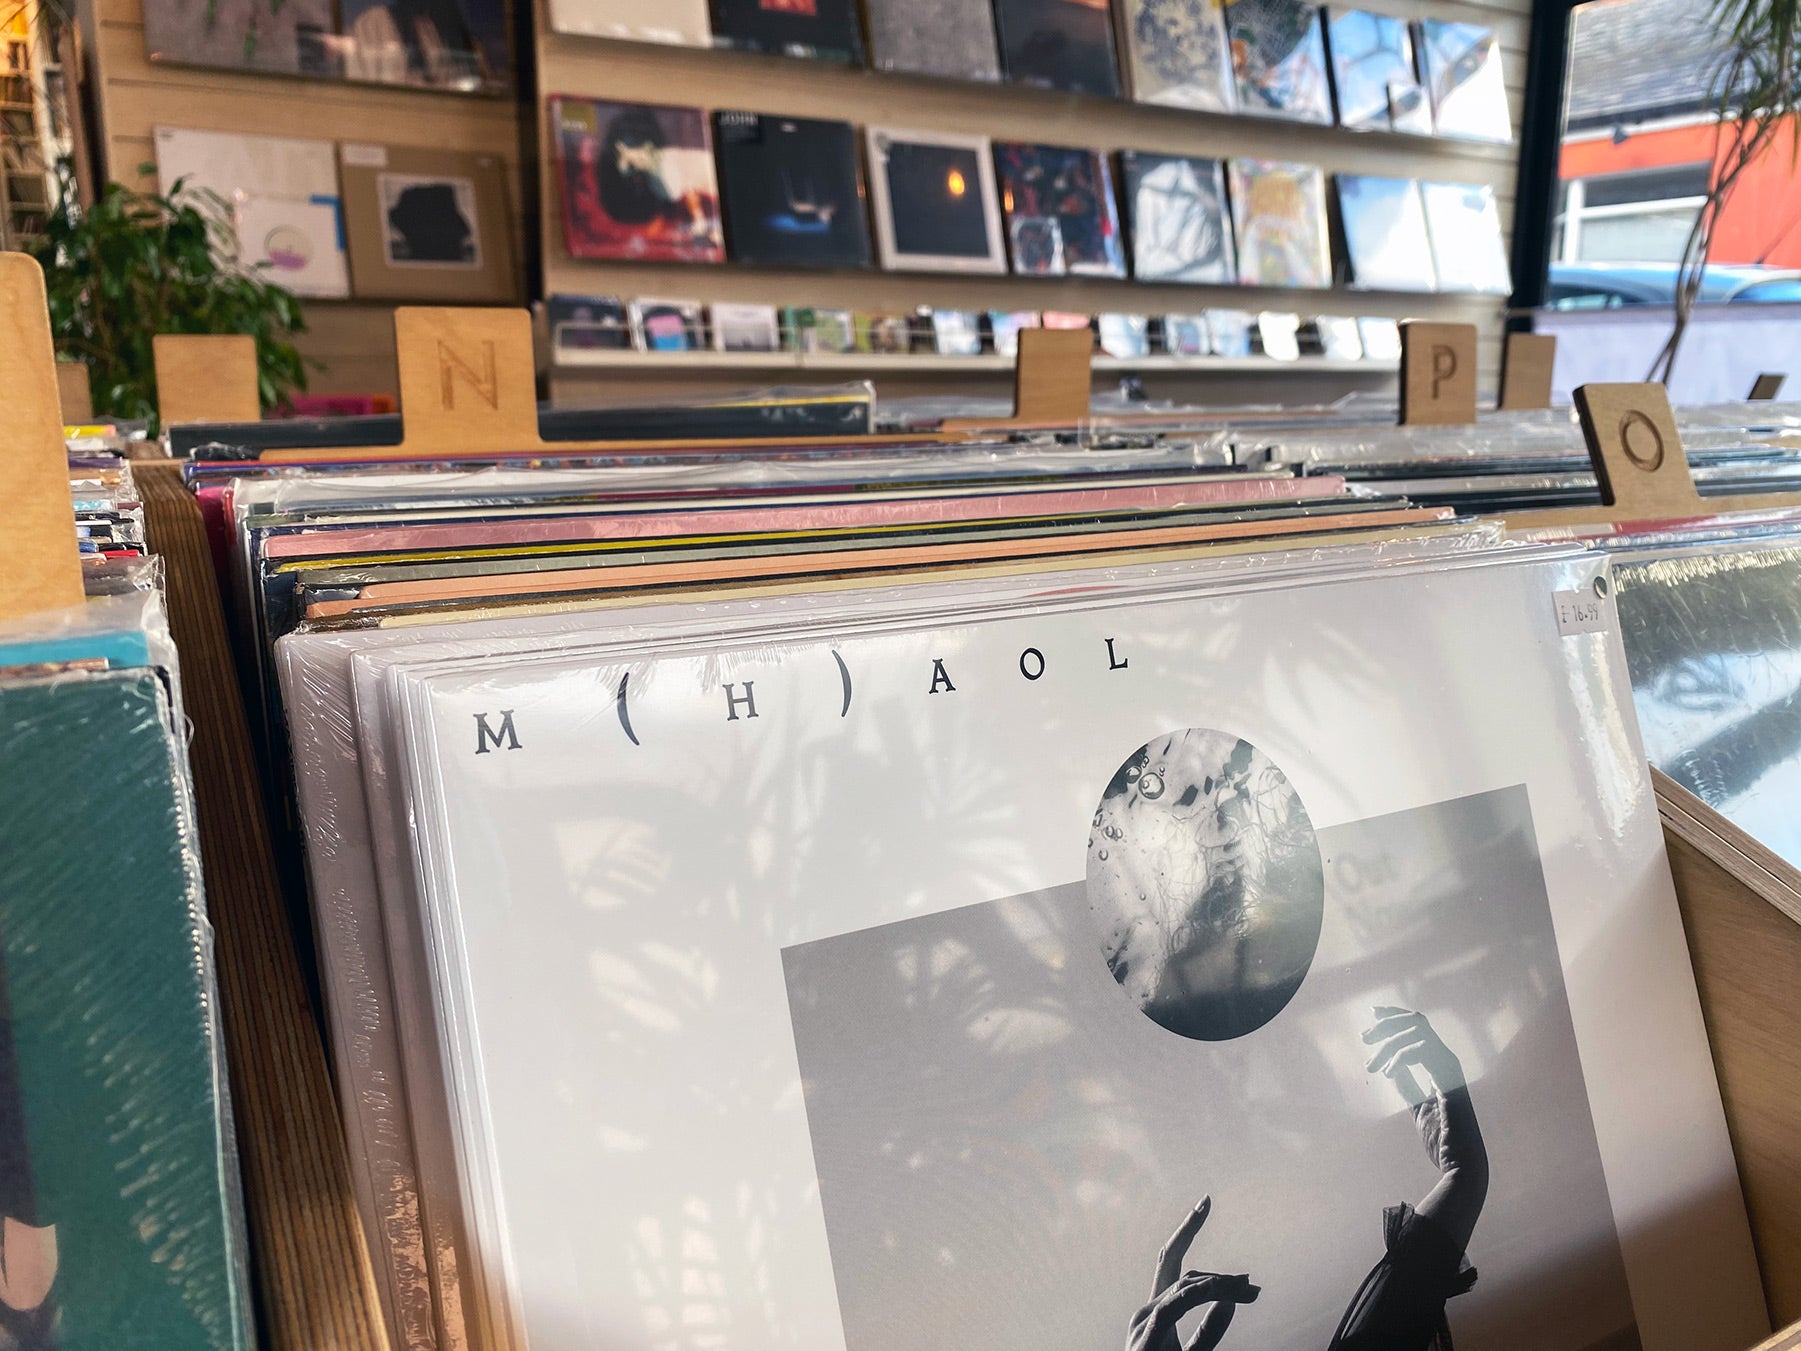 Records of the Week: M(h)aol, Bonobo, Cat Power, dvr, Richard Fearless and Fazer.